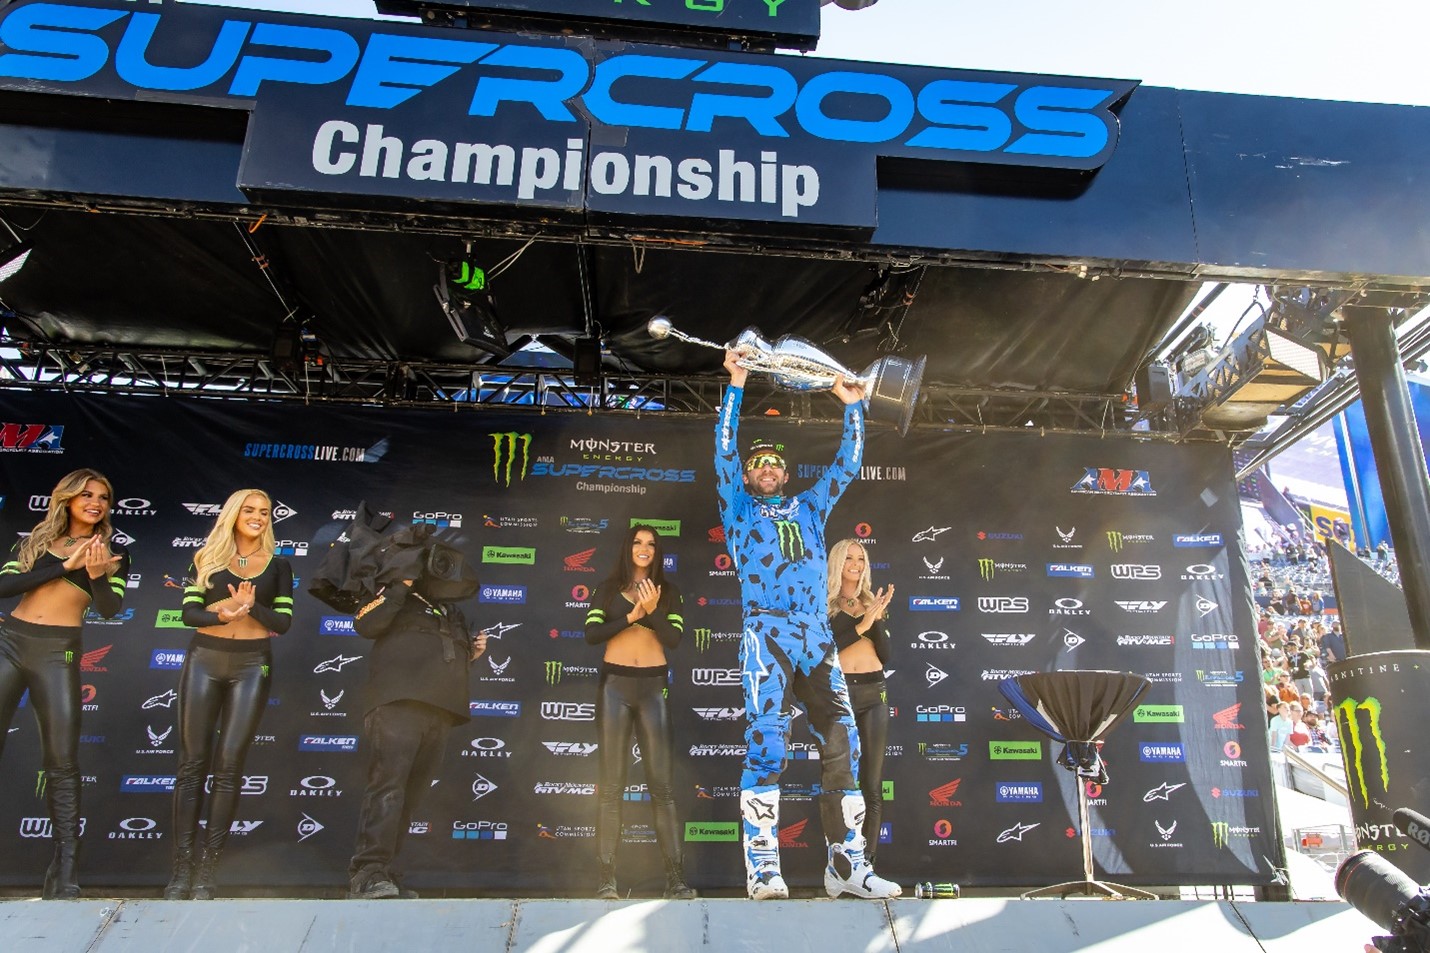 Eli Tomac hoisting the Monster Energy AMA Supercross Championship trophy after clinching his second world championship in Denver at Empower Field at Mile High Stadium. Photo Credit: Feld Motor Sports